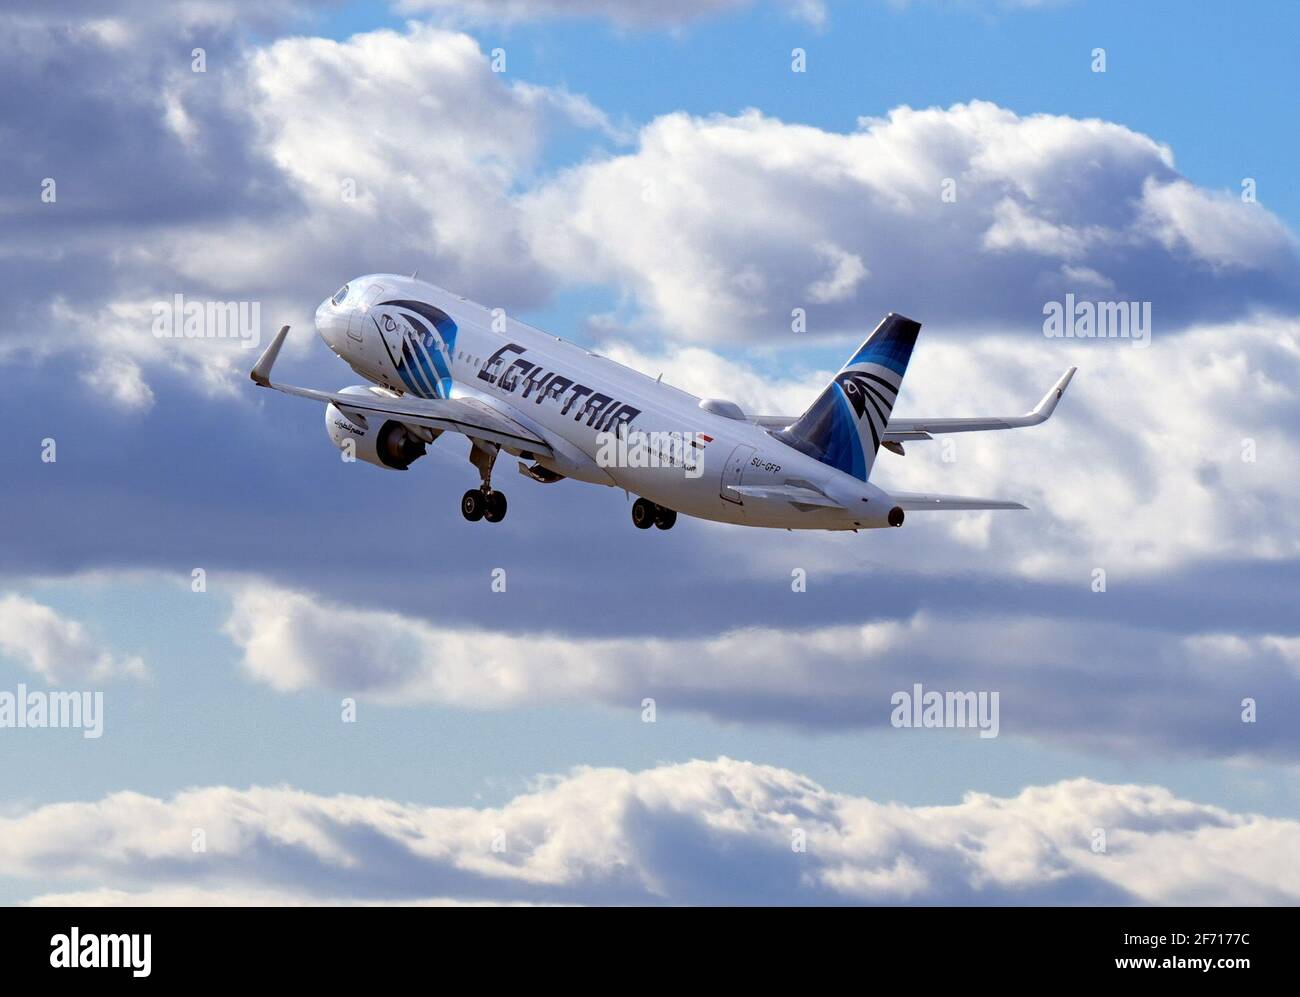 03 April 2021, Brandenburg, Schönefeld: An Airbus A 320 neo of the airline EgyptAir takes off from the southern runway of Berlin Brandenburg Airport 'Willy Brandt'. Since the beginning of April 2021, both runways have been used on a monthly alternating basis in order to distribute aircraft noise pollution in the region more evenly. Photo: Soeren Stache/dpa-Zentralbild/ZB Stock Photo